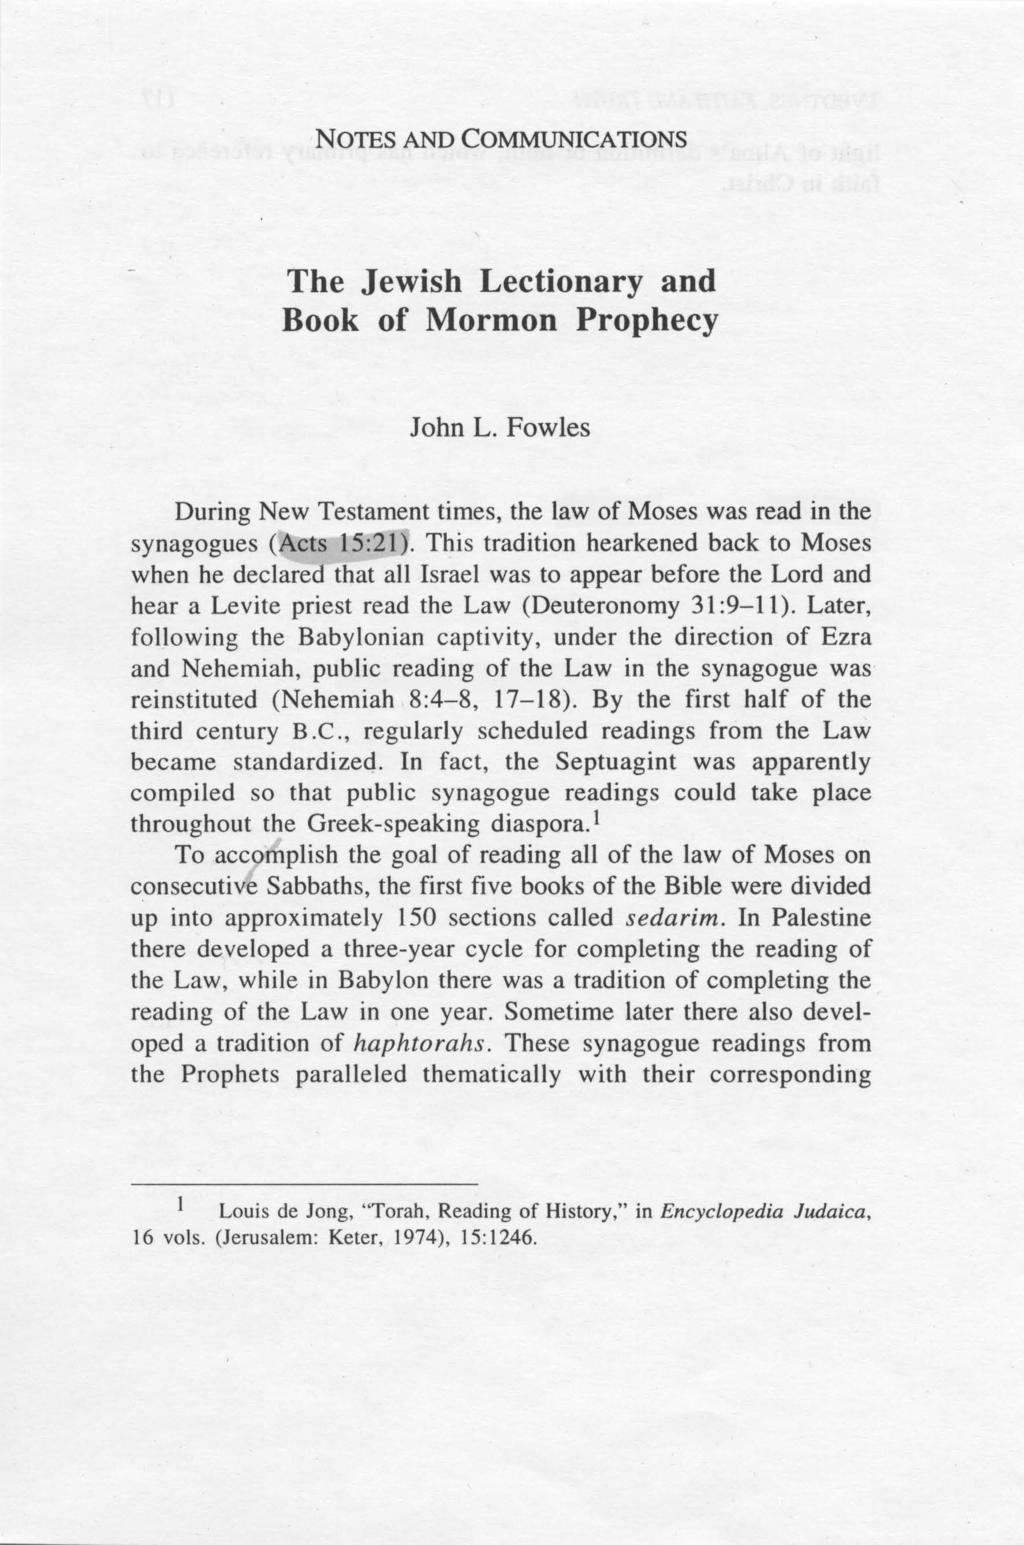 NOTES AND COMMUNICATIONS The Jewish Lectionary and Book of Mormon Prophecy John L. Fowles During New Testament times, the law of Moses was read in the synagogues (Acts 15:21).